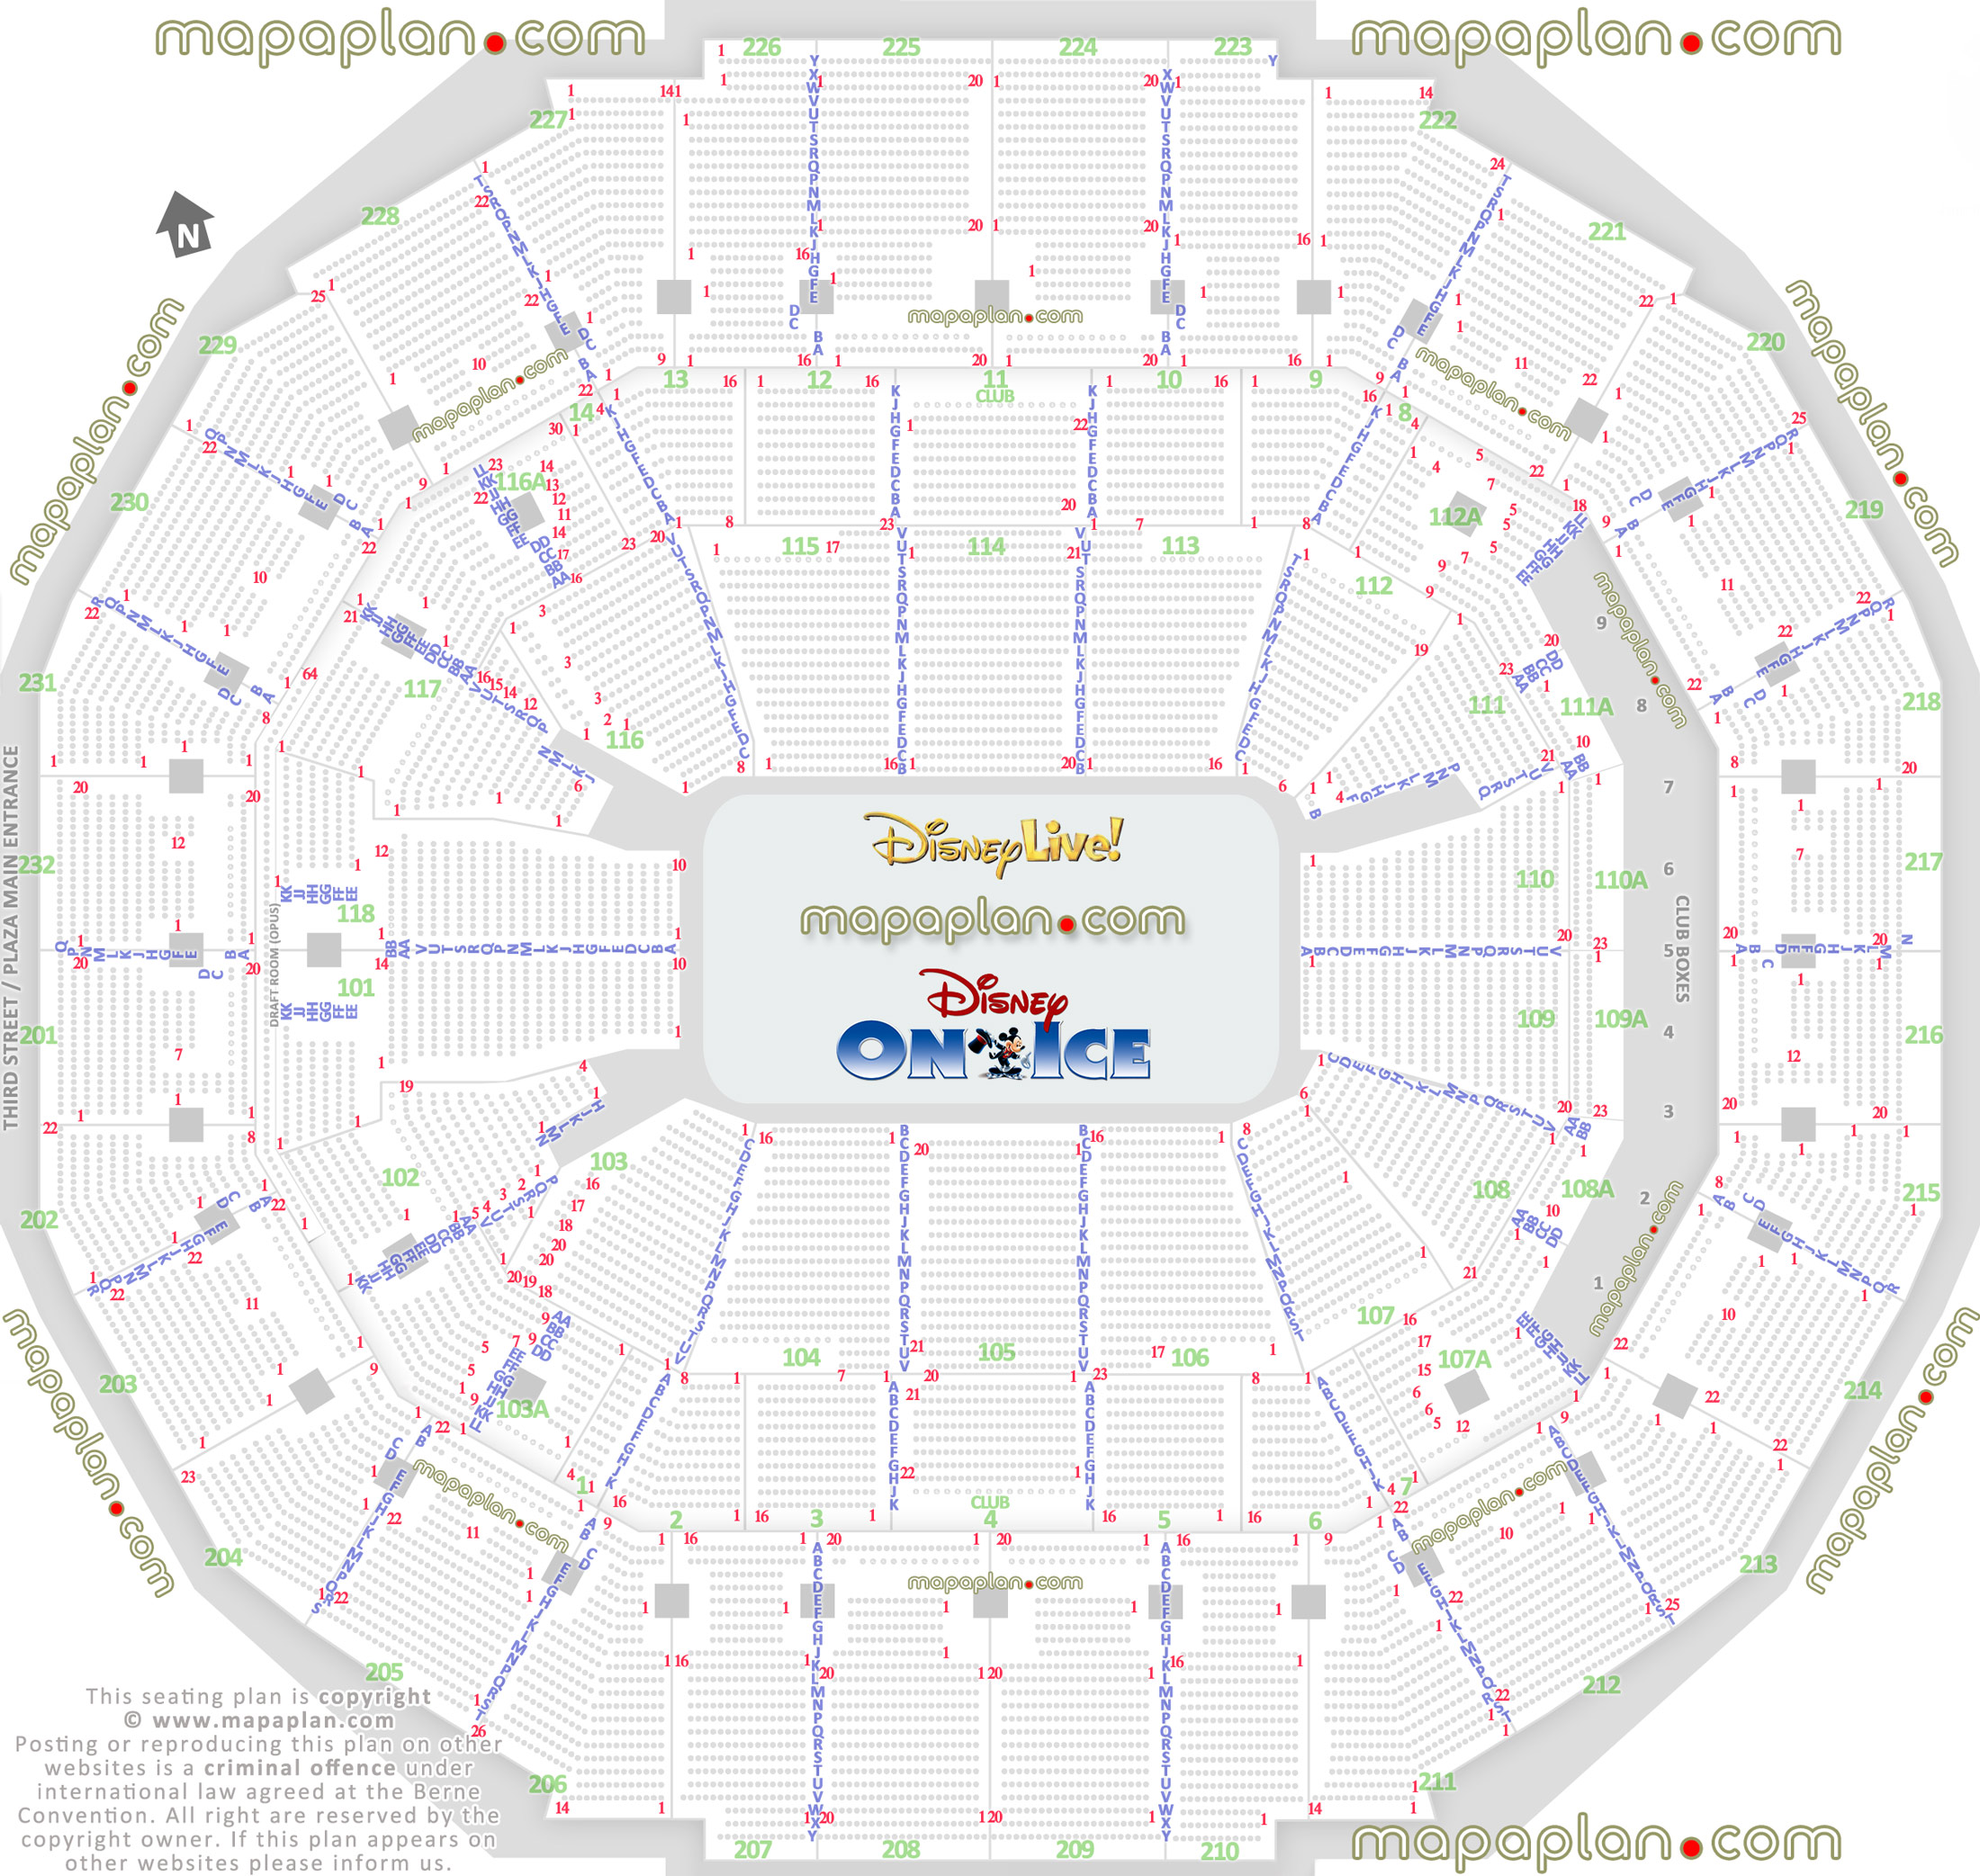 disney live ice memphis usa best seat finder 3d interactive tool precise detailed aisle seat row numbering location data plan ice rink event floor level plaza lower bowl concourse terrace upper balcony Memphis FedExForum seating chart